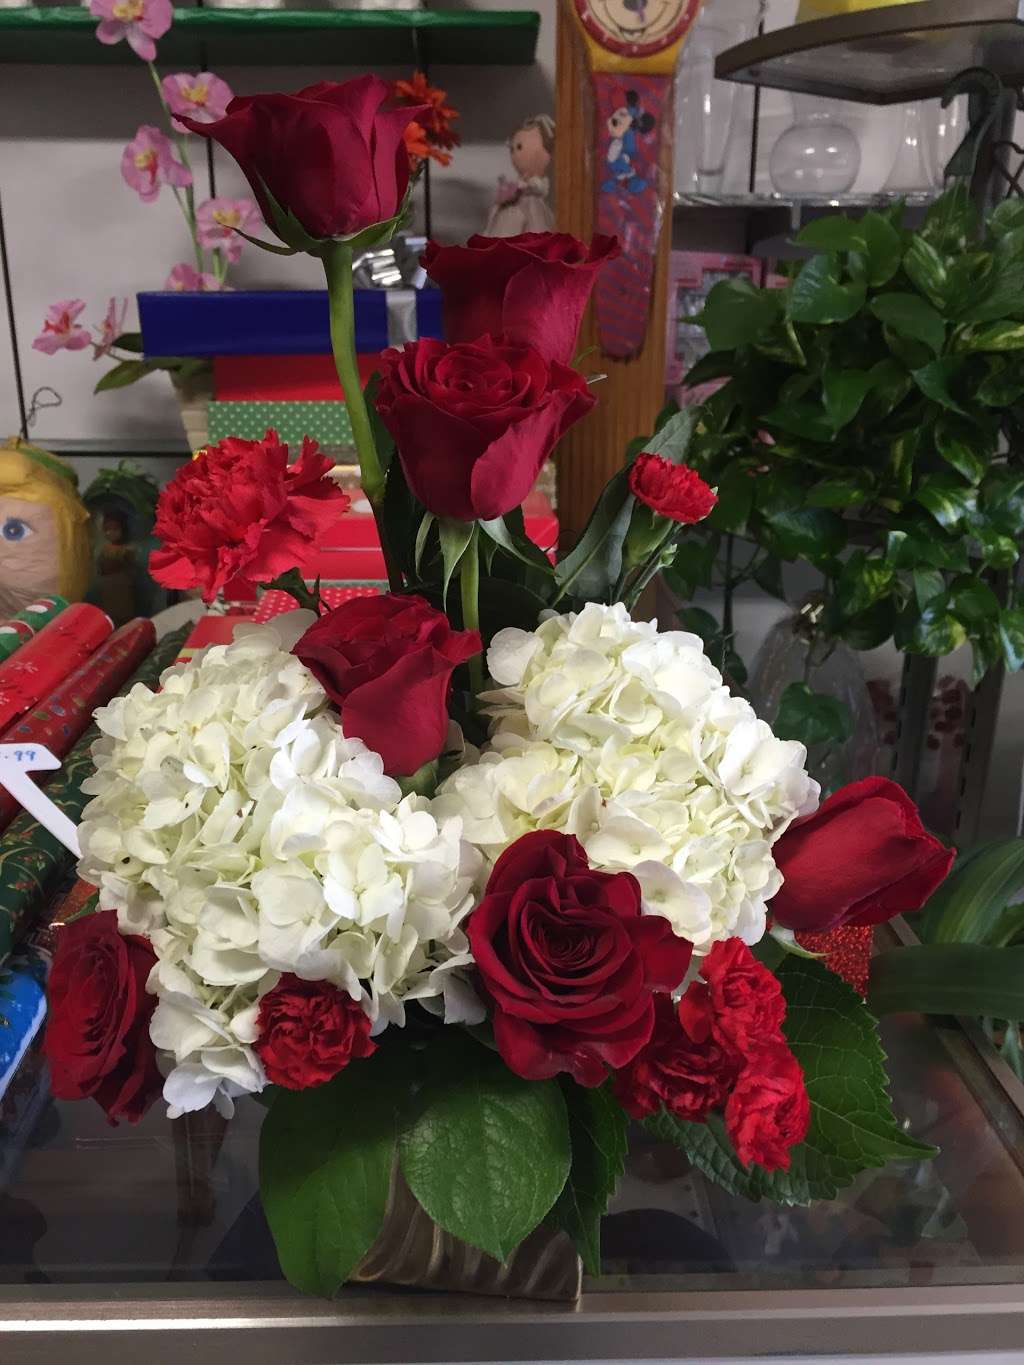 Melinas Flowers & Gift Shop | 3550 Gage Ave, Bell, CA 90201 | Phone: (323) 588-7157